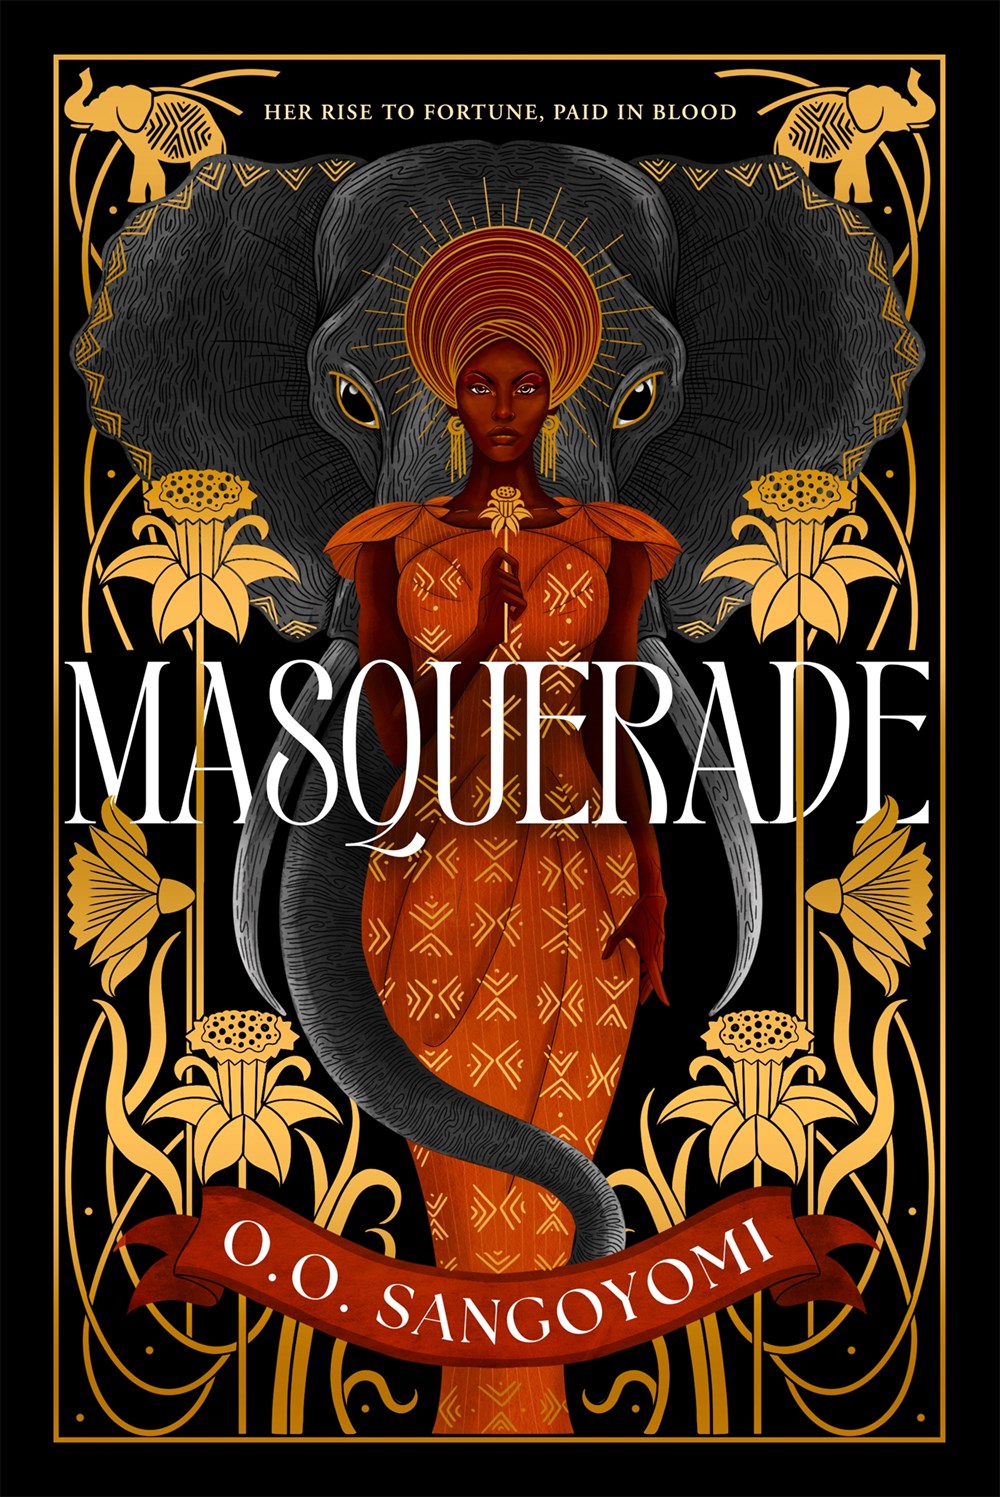 'Masquerade' by O.O. Sangoyomi | SFF Debut of the Month